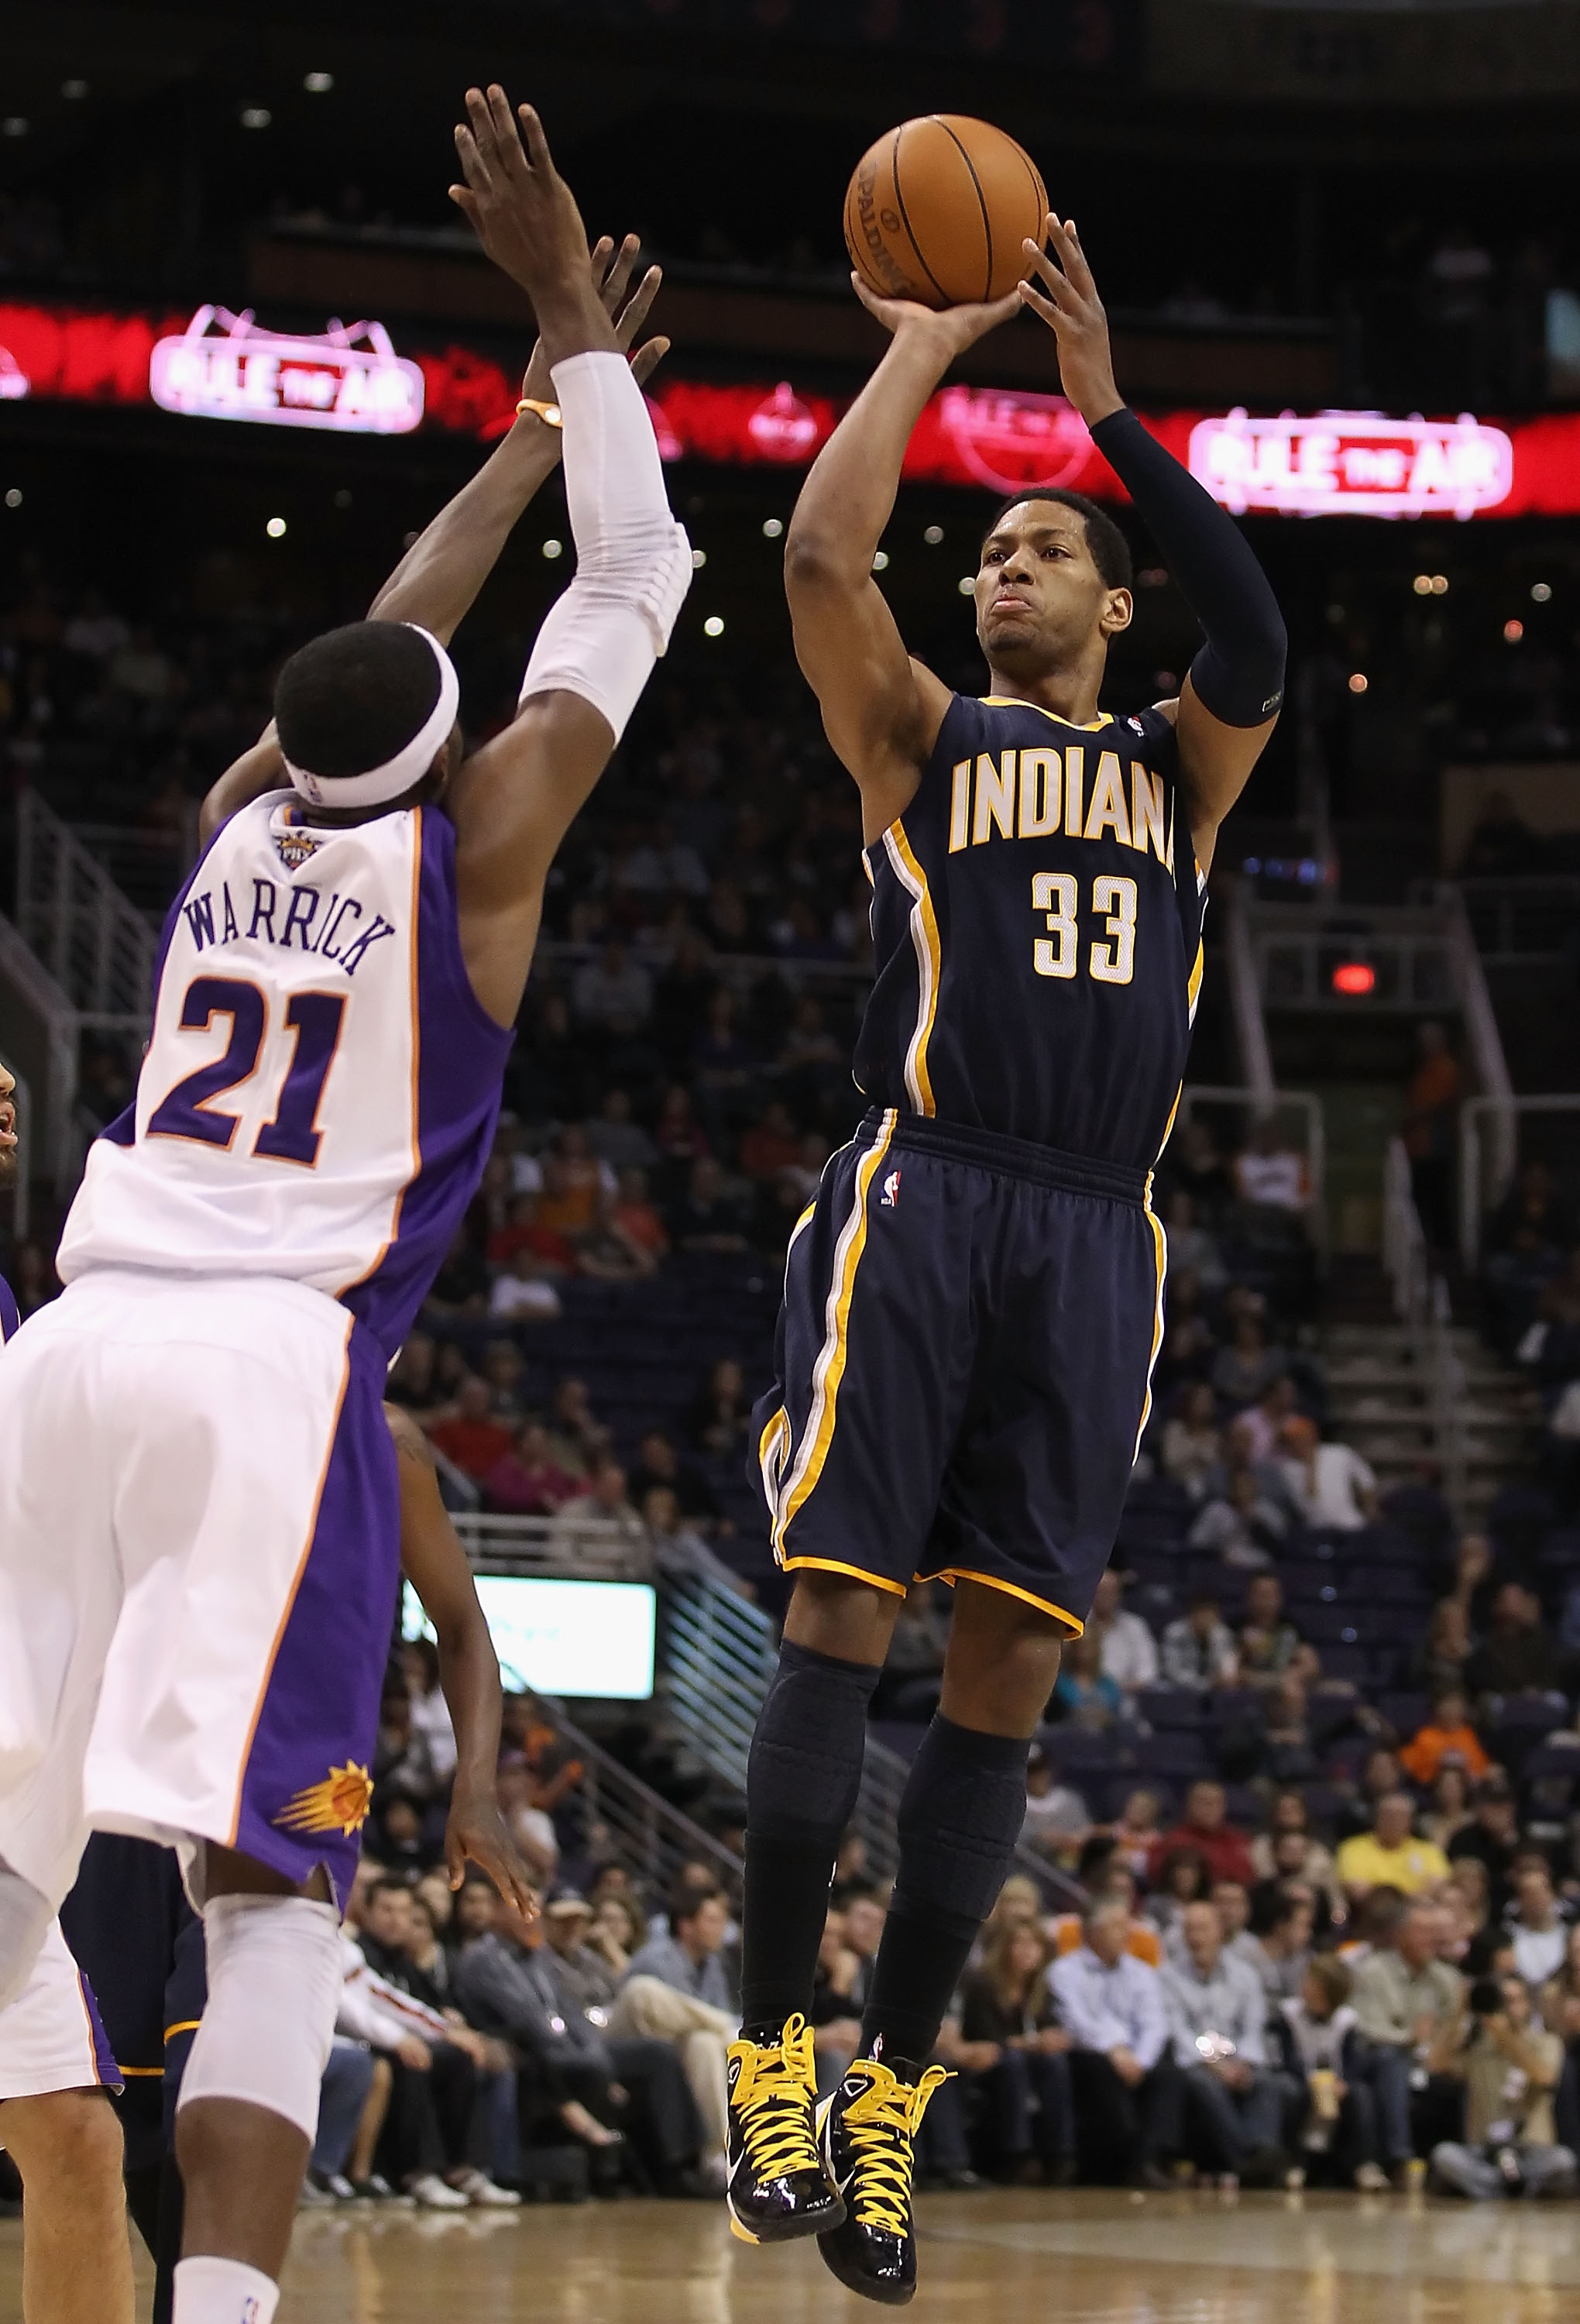 PHOENIX - DECEMBER 03:  Danny Granger #33 of the Indiana Pacers puts up a shot over Hakim Warrick #21 of the Phoenix Suns during the NBA game at US Airways Center on December 3, 2010 in Phoenix, Arizona.  The Suns defeated the Pacers 107-97.  NOTE TO USER